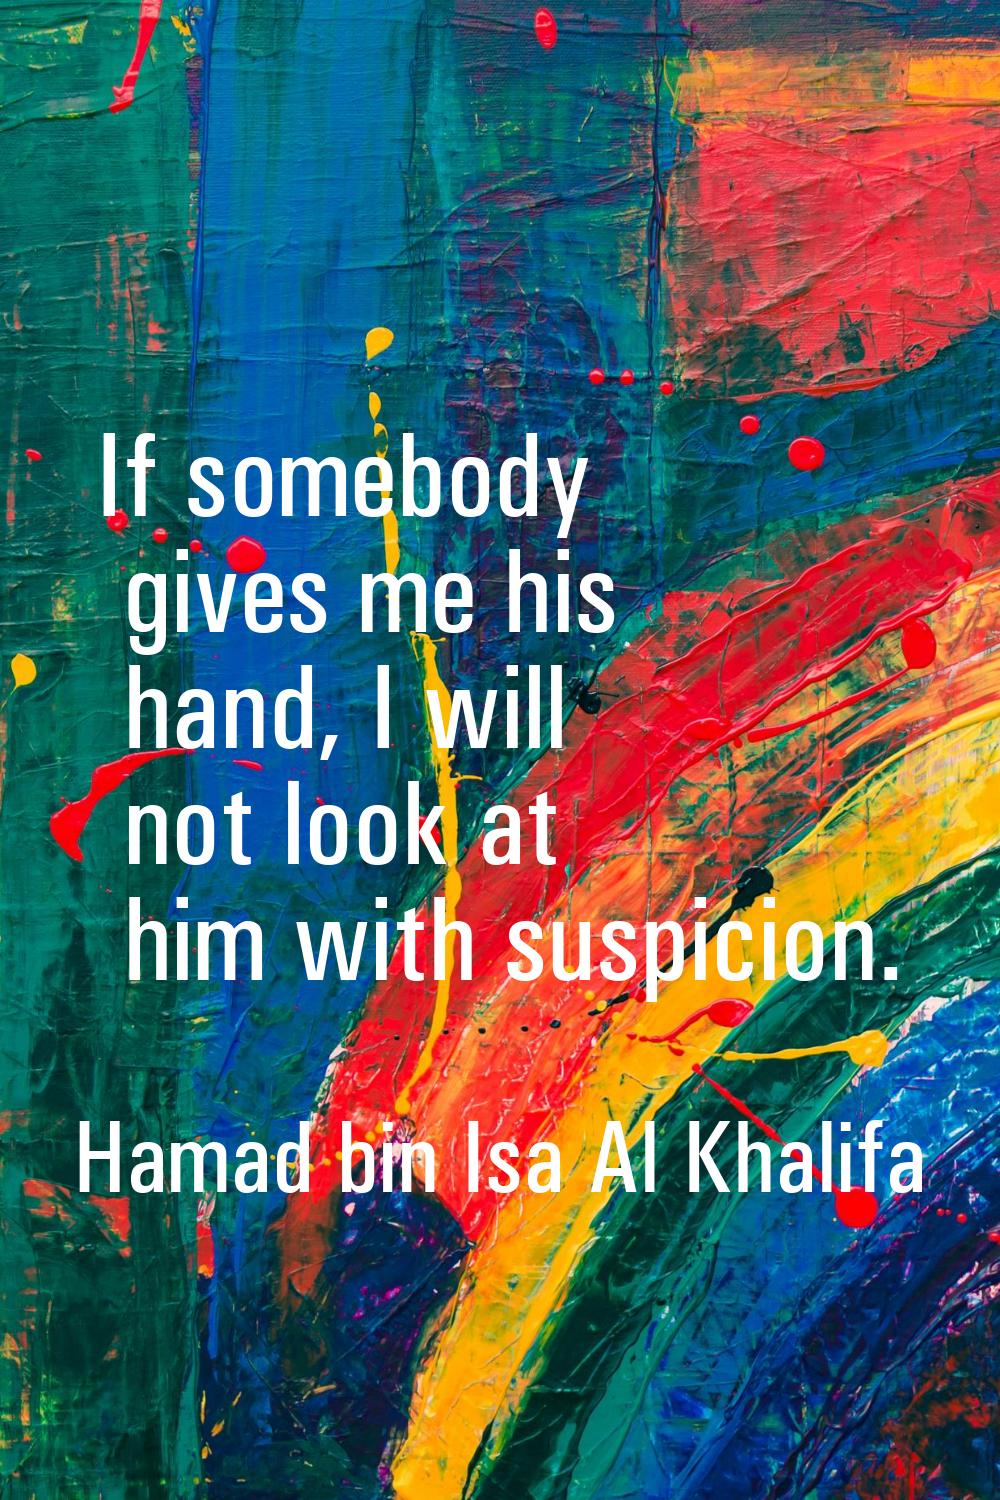 If somebody gives me his hand, I will not look at him with suspicion.